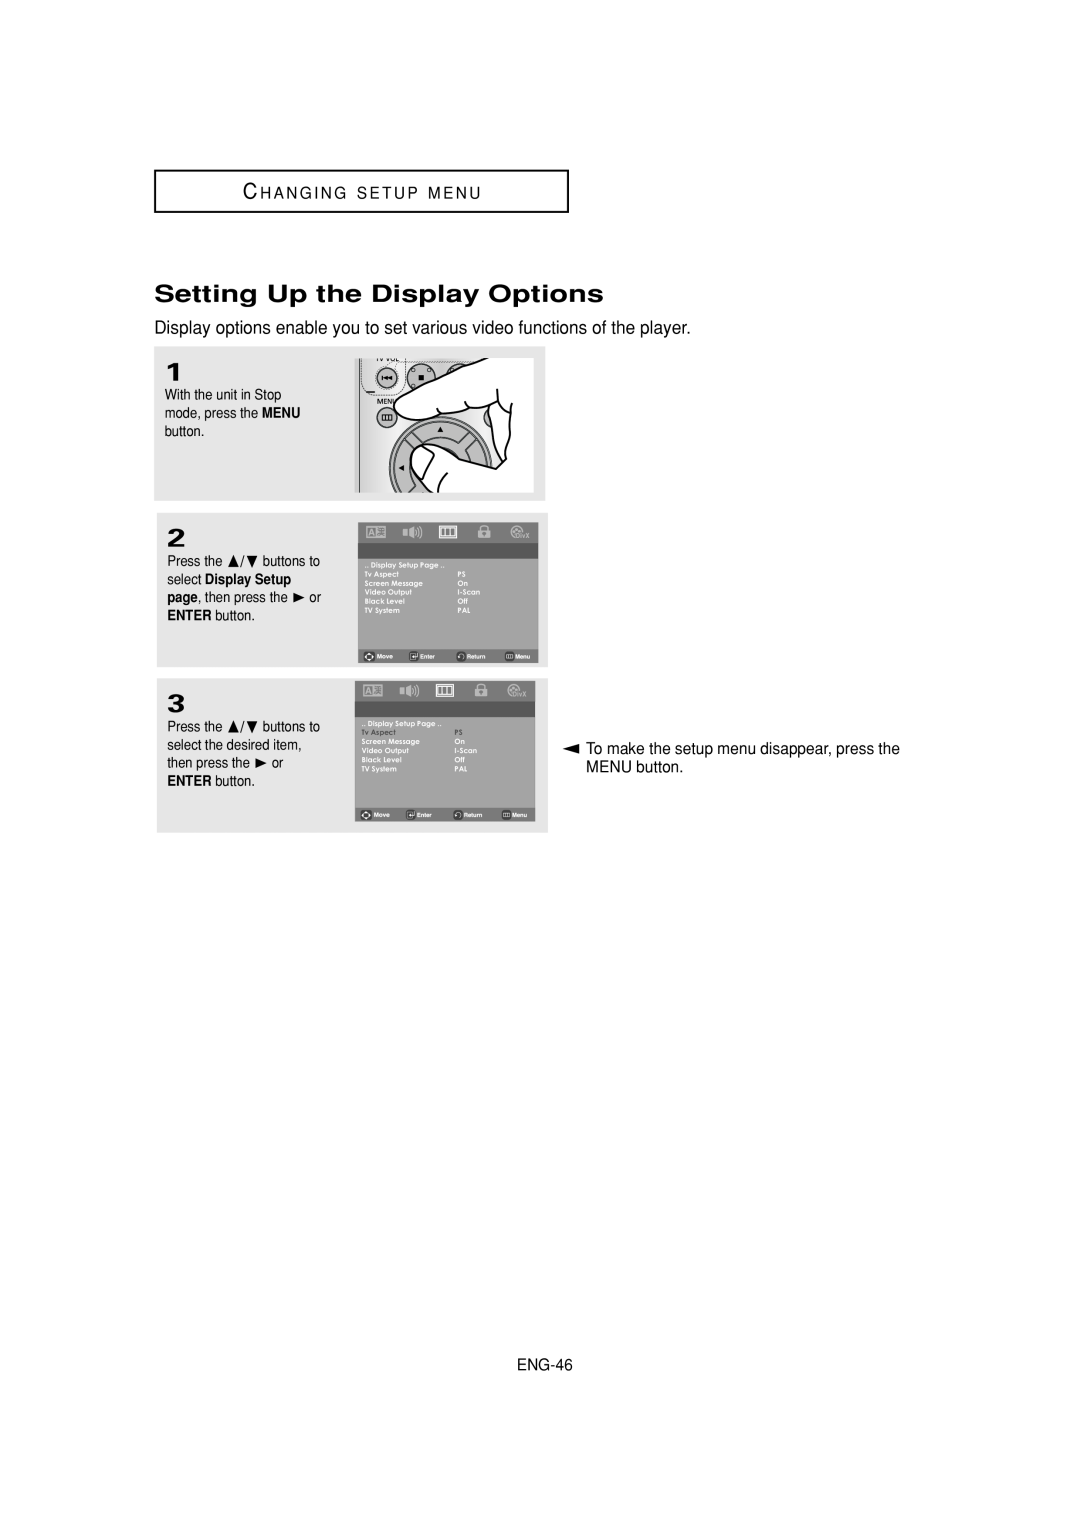 Samsung DVD-P181 manual Setting Up the Display Options, C H A N G I N G S E T U P M E N U, ENG-46, Press the / buttons to 